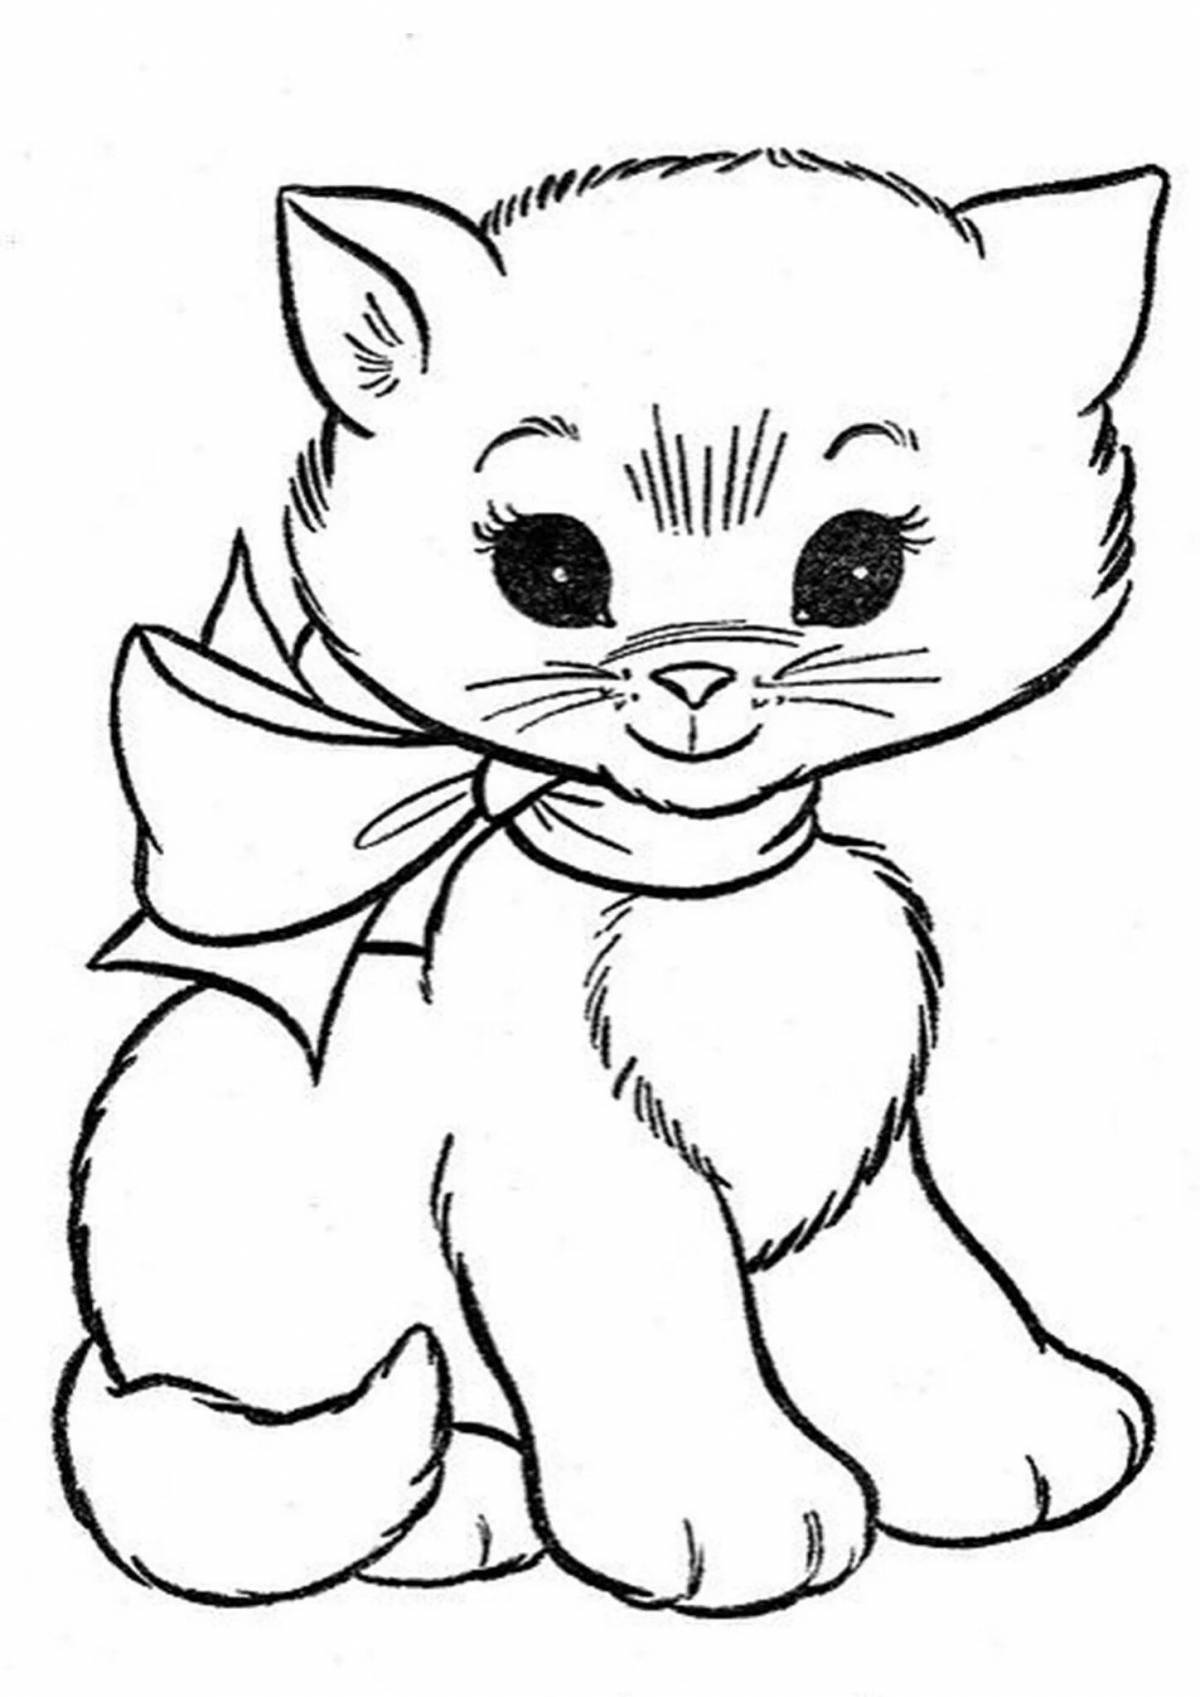 Cute coloring pages kittens with dogs for children 3 4 years old